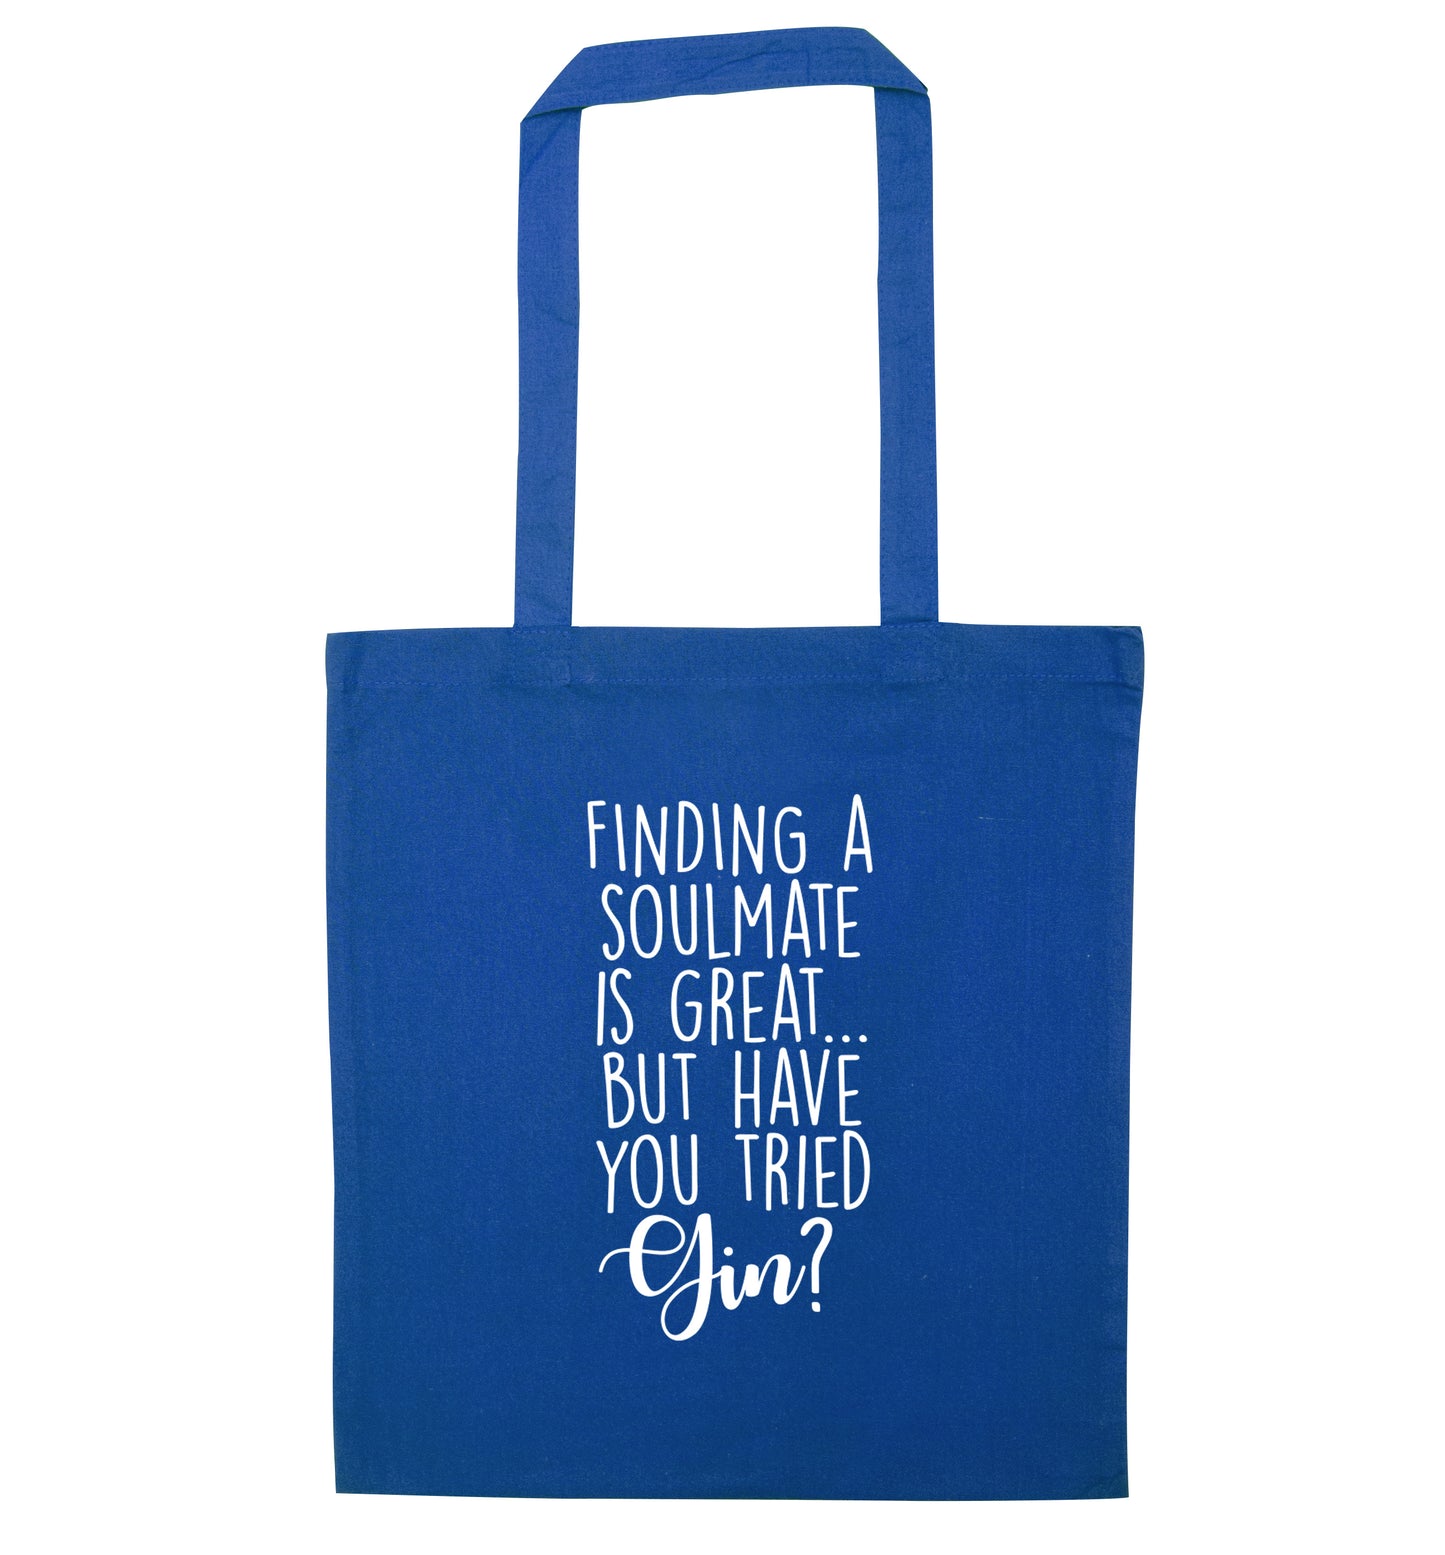 Finding a soulmate is great but have you tried gin? blue tote bag